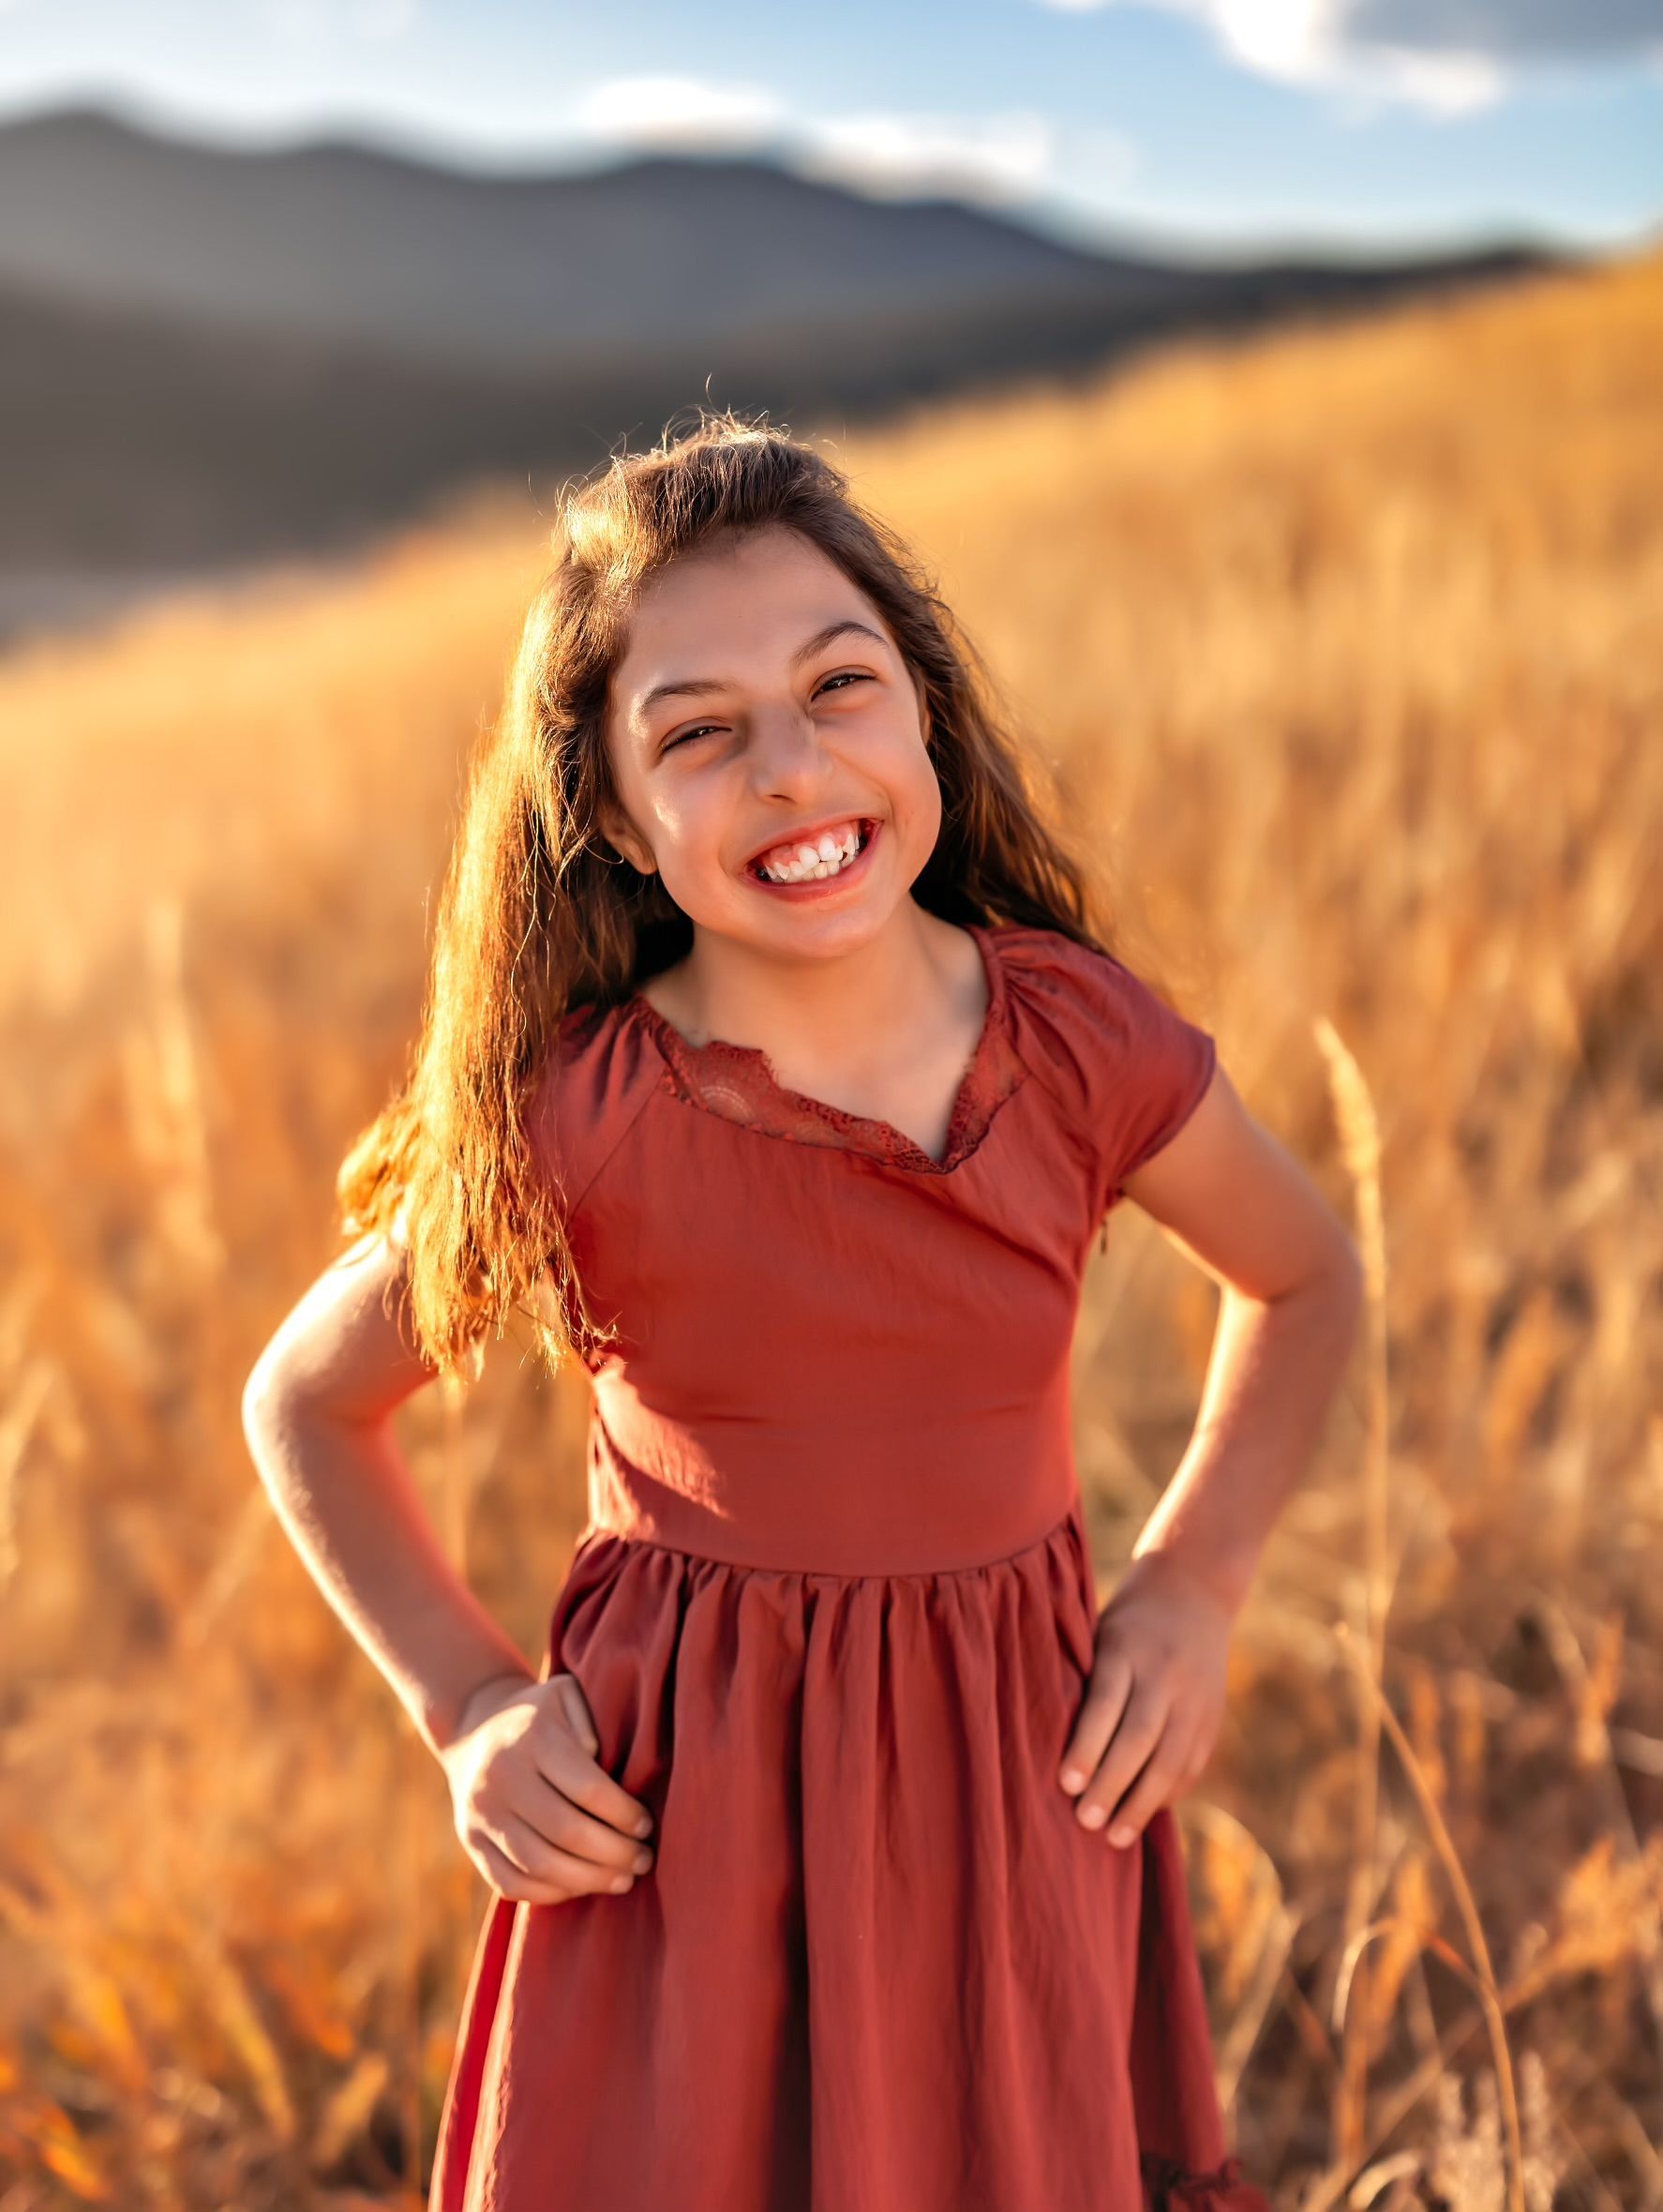 Harper in a red dress and standing in a field and smiling